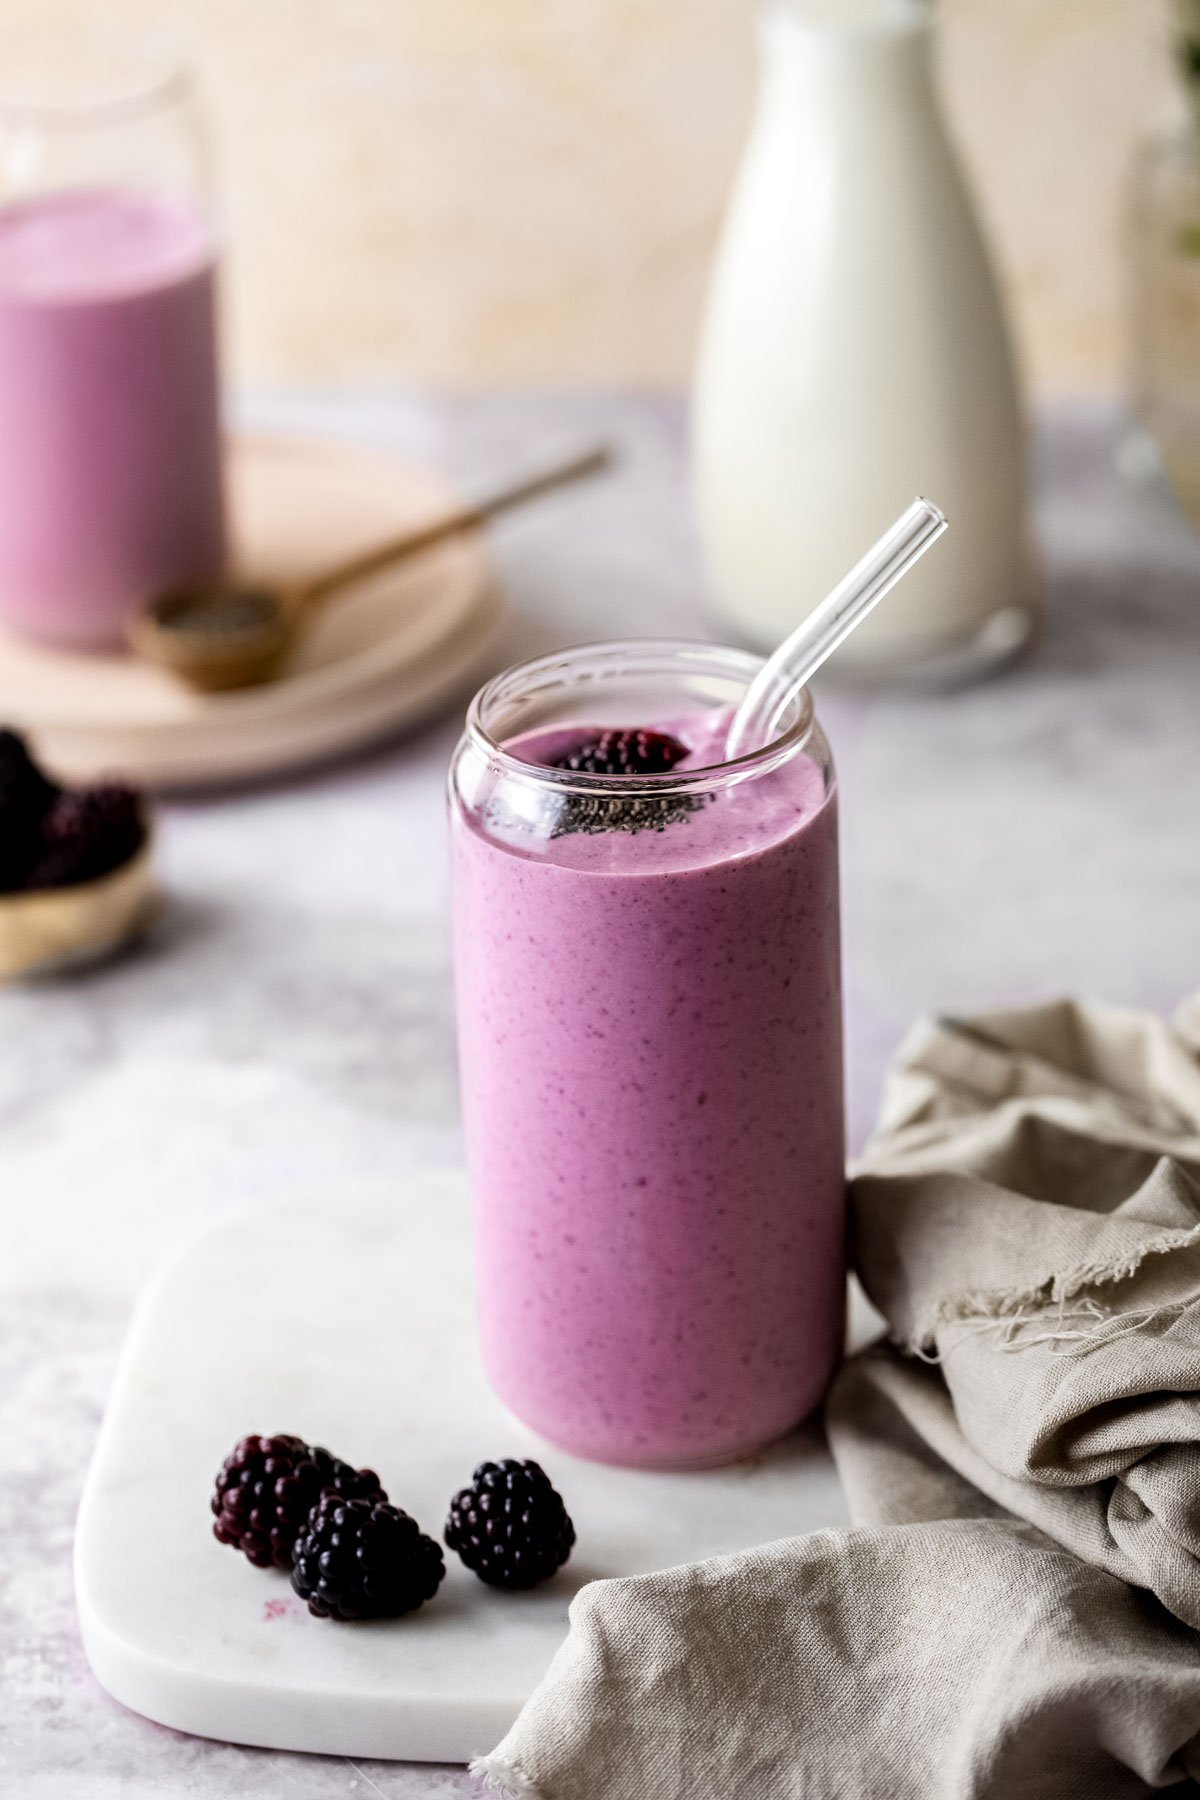 A blackberry smoothie in a serving glass with a glass straw